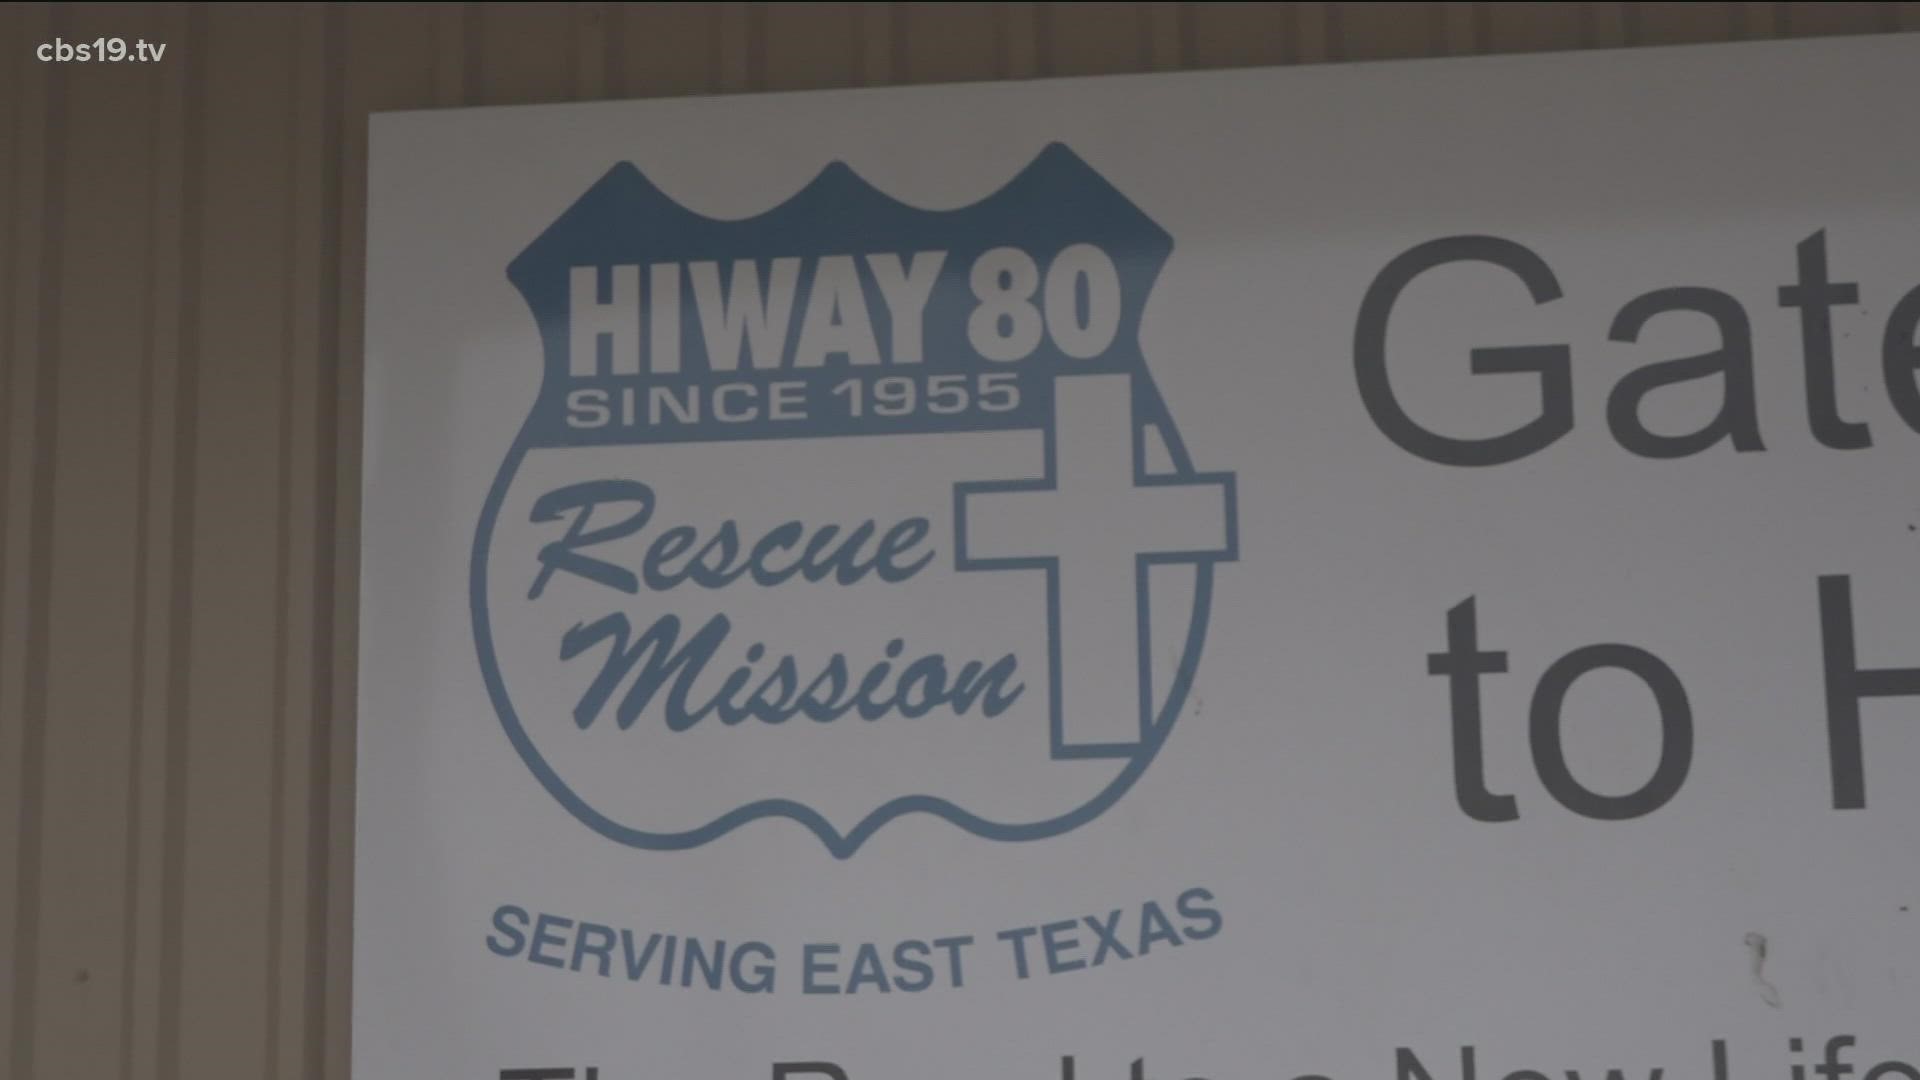 As a cold front settles in East Texas, the Hiway 80 Rescue Mission is continuing to provide shelter and resources to those in need.